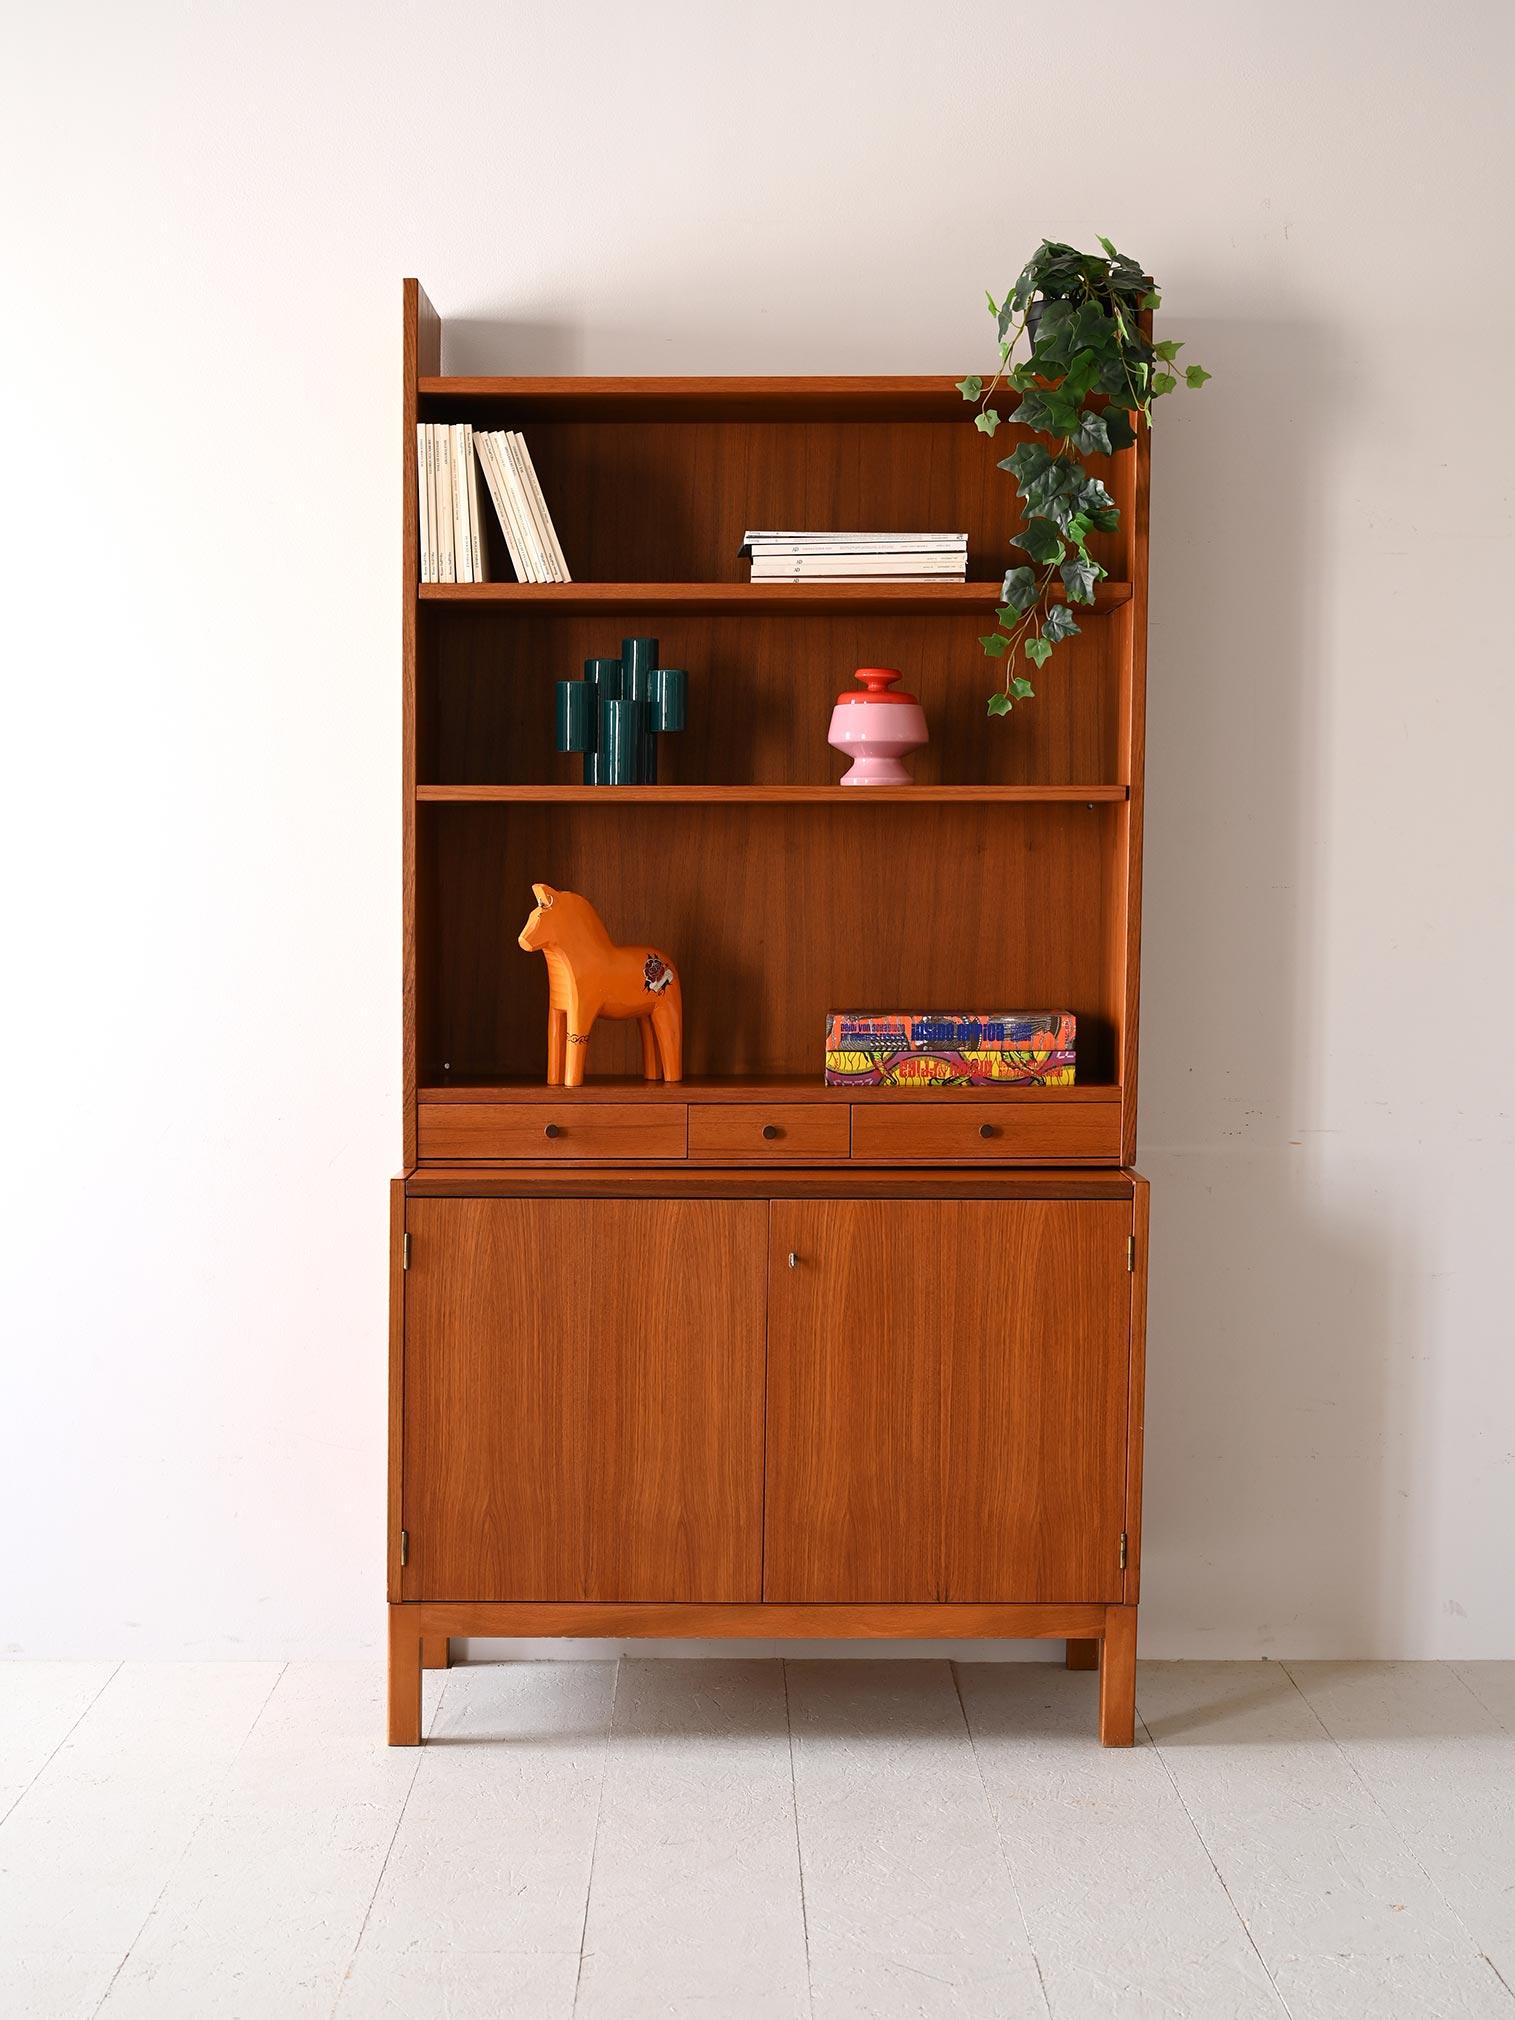 1960s cabinet open shelving and storage compartment.

This teak bookcase is an elegant and functional piece of furniture that harks back to the best Scandinavian design tradition. 
The open top provides a space for books or art supplies, while the